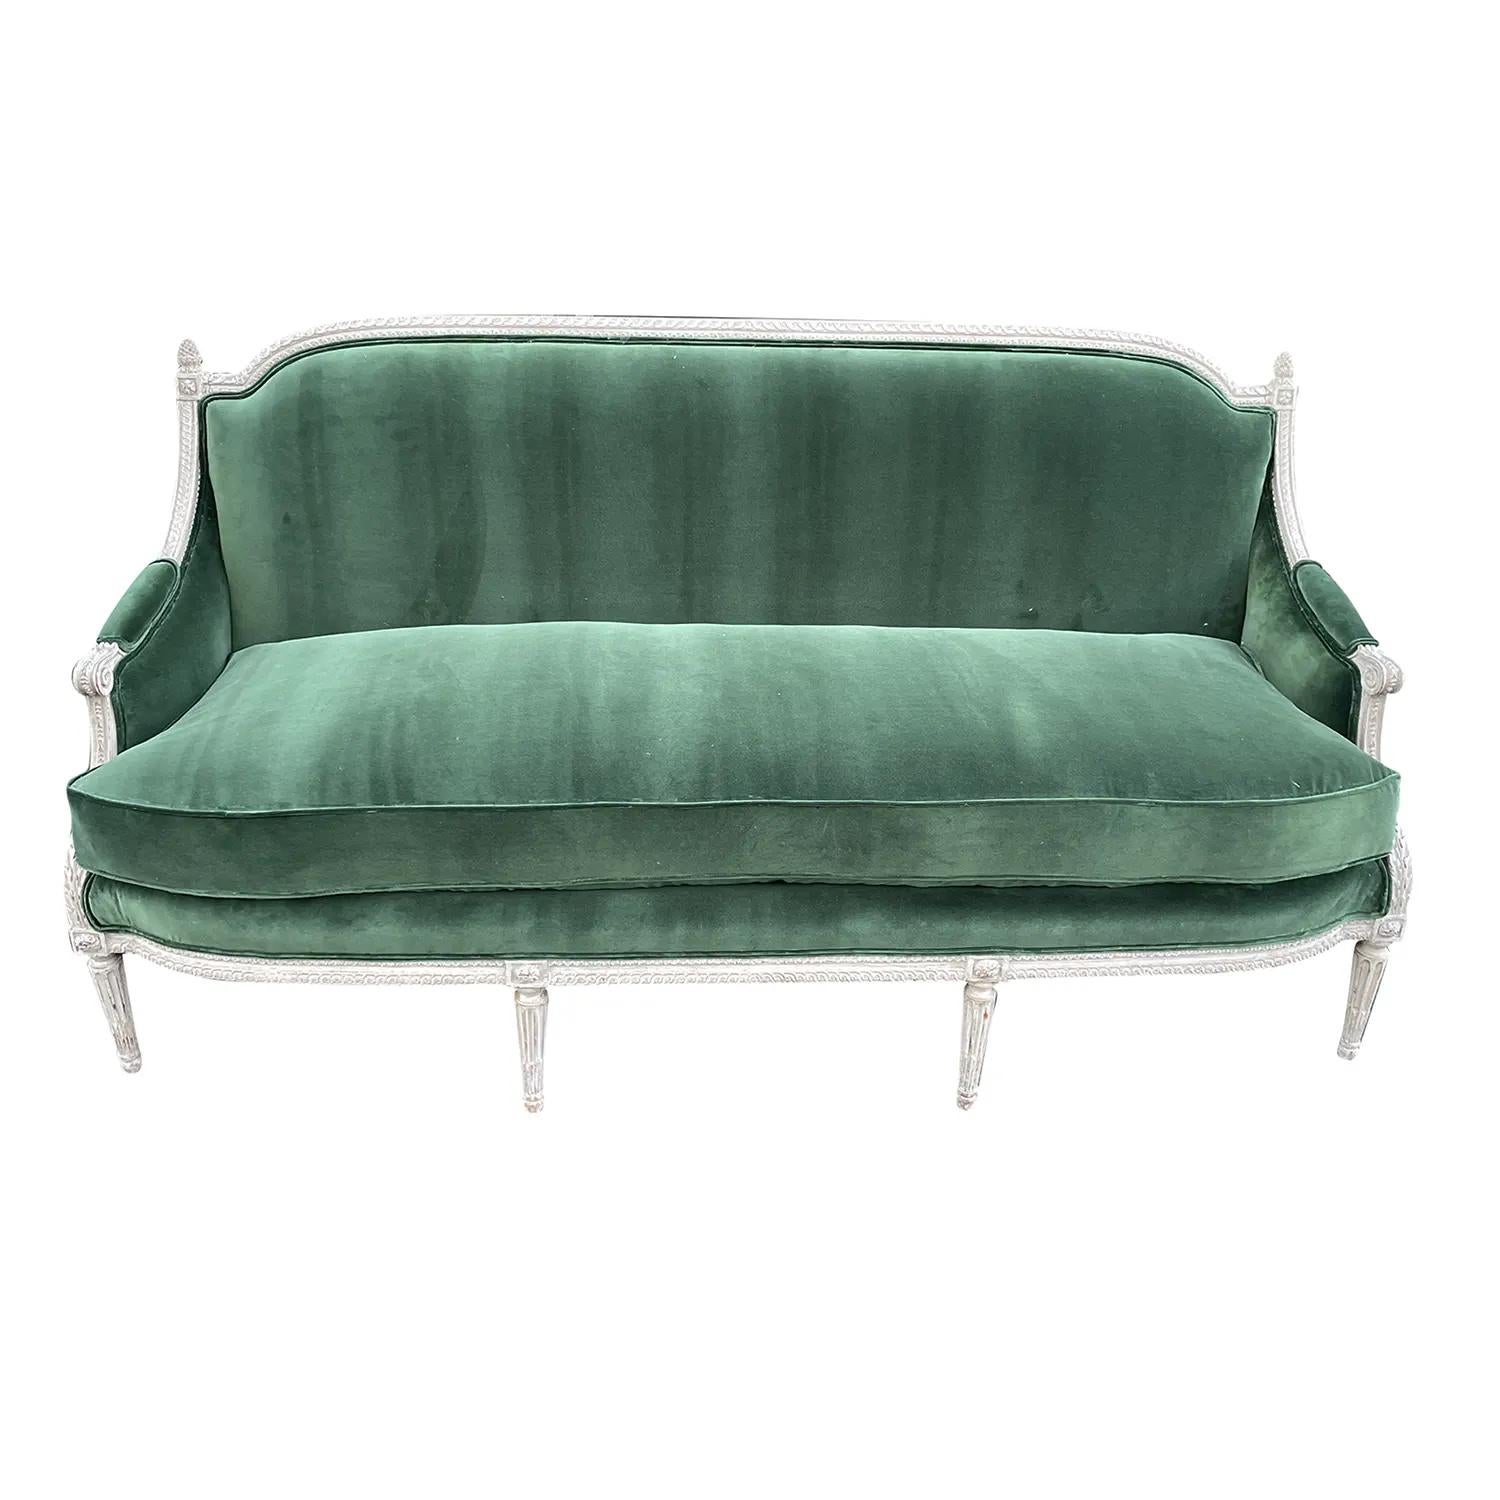 An 18th Century French three seater sofa, stamped Sulpice Brizard (Master 1762) 1735-1796. The hand crafted Parisian settee has a partial carved, painted grey Beechwood frame, in good condition. Newly upholstered in a green velour from Lelièvre